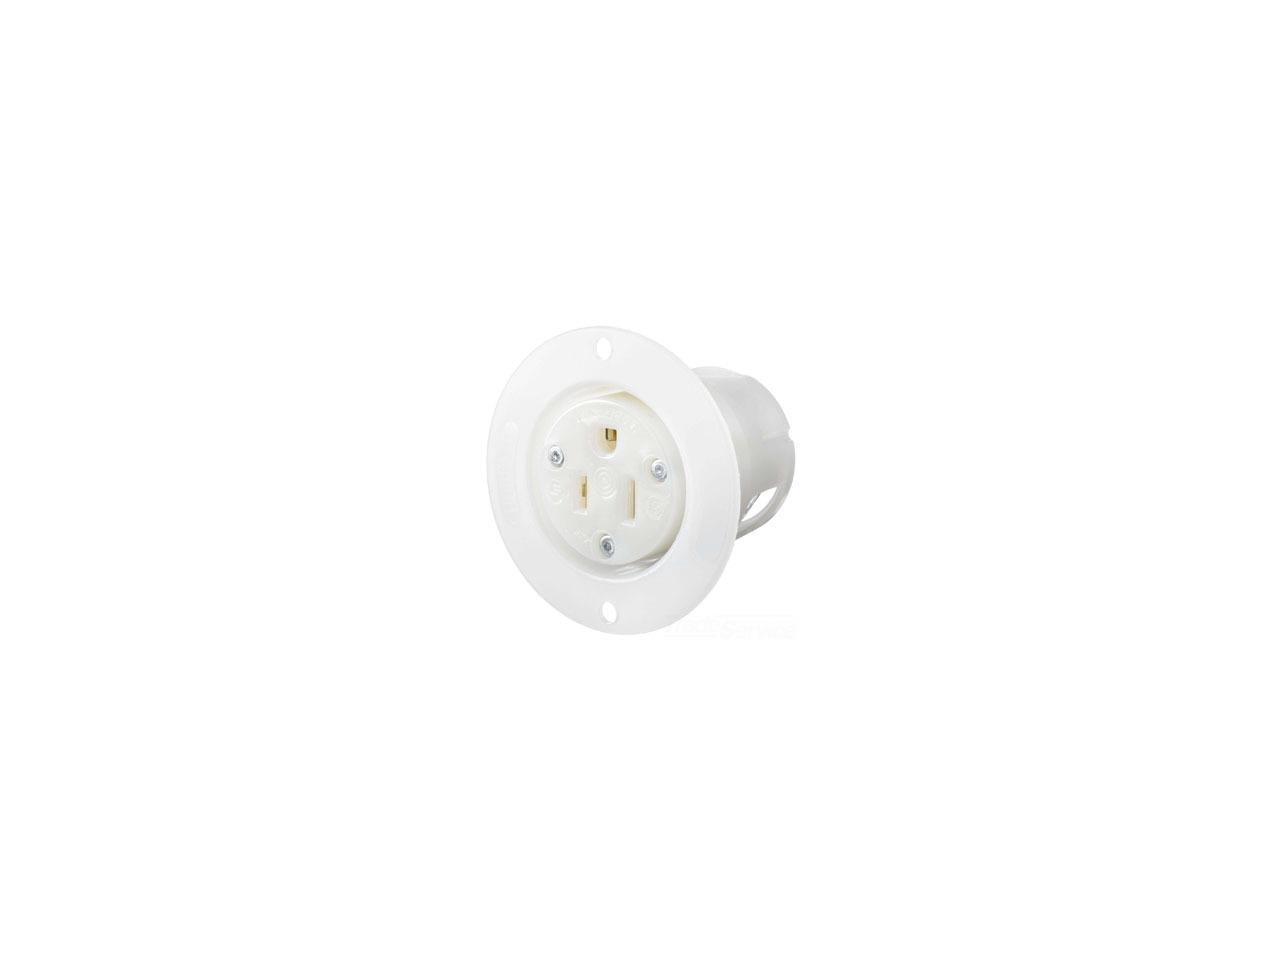 Hubbell Wiring Devicekellems HBL5279C Receptacle Mini 15a 125v for sale online 